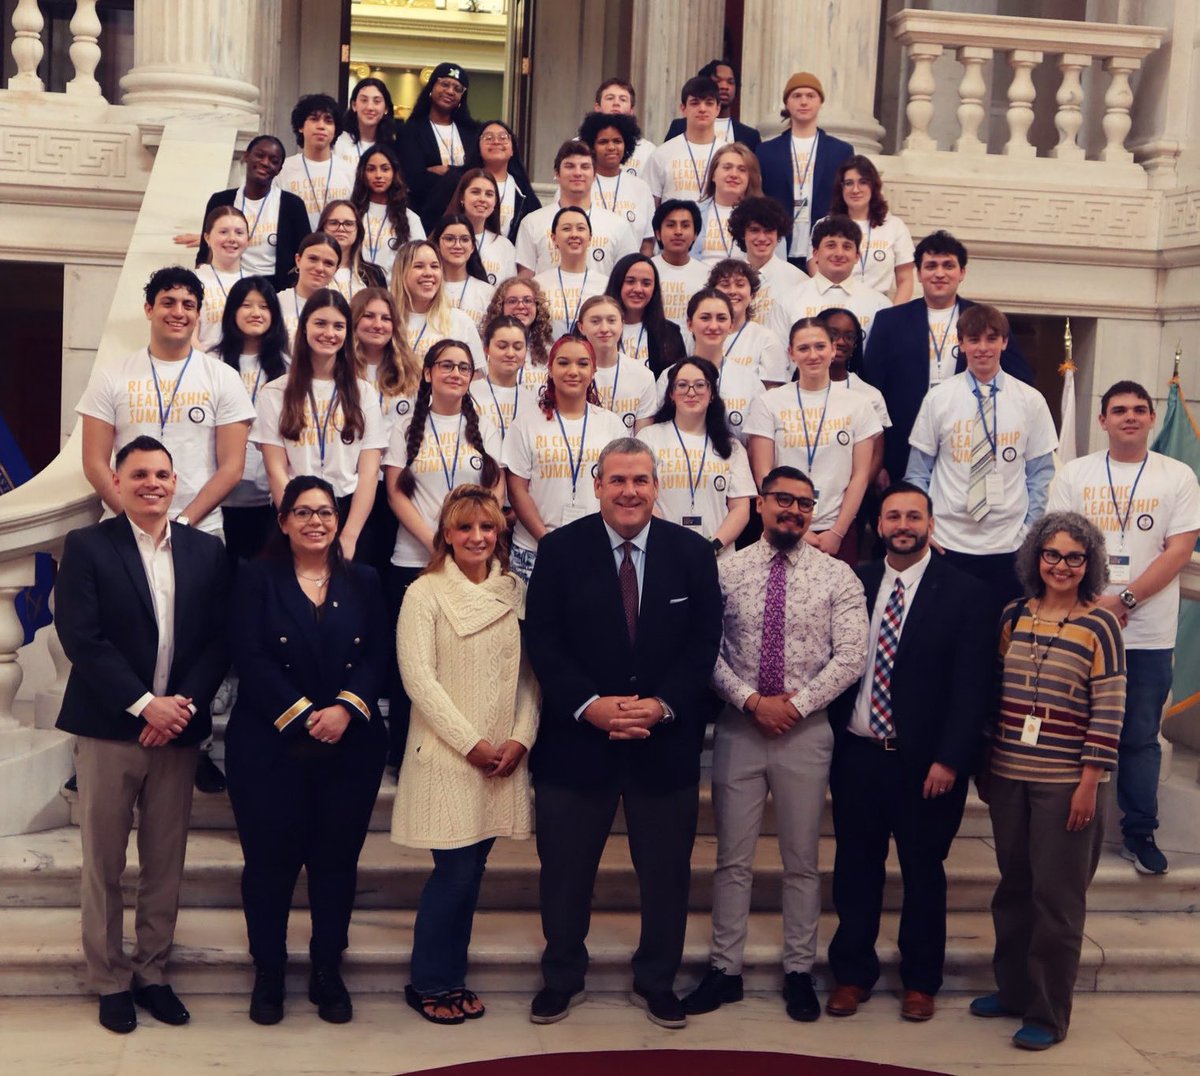 Happy to be part of the inaugural RI Civic Leadership Summit with fantastic high school students from all over our state! 🏛